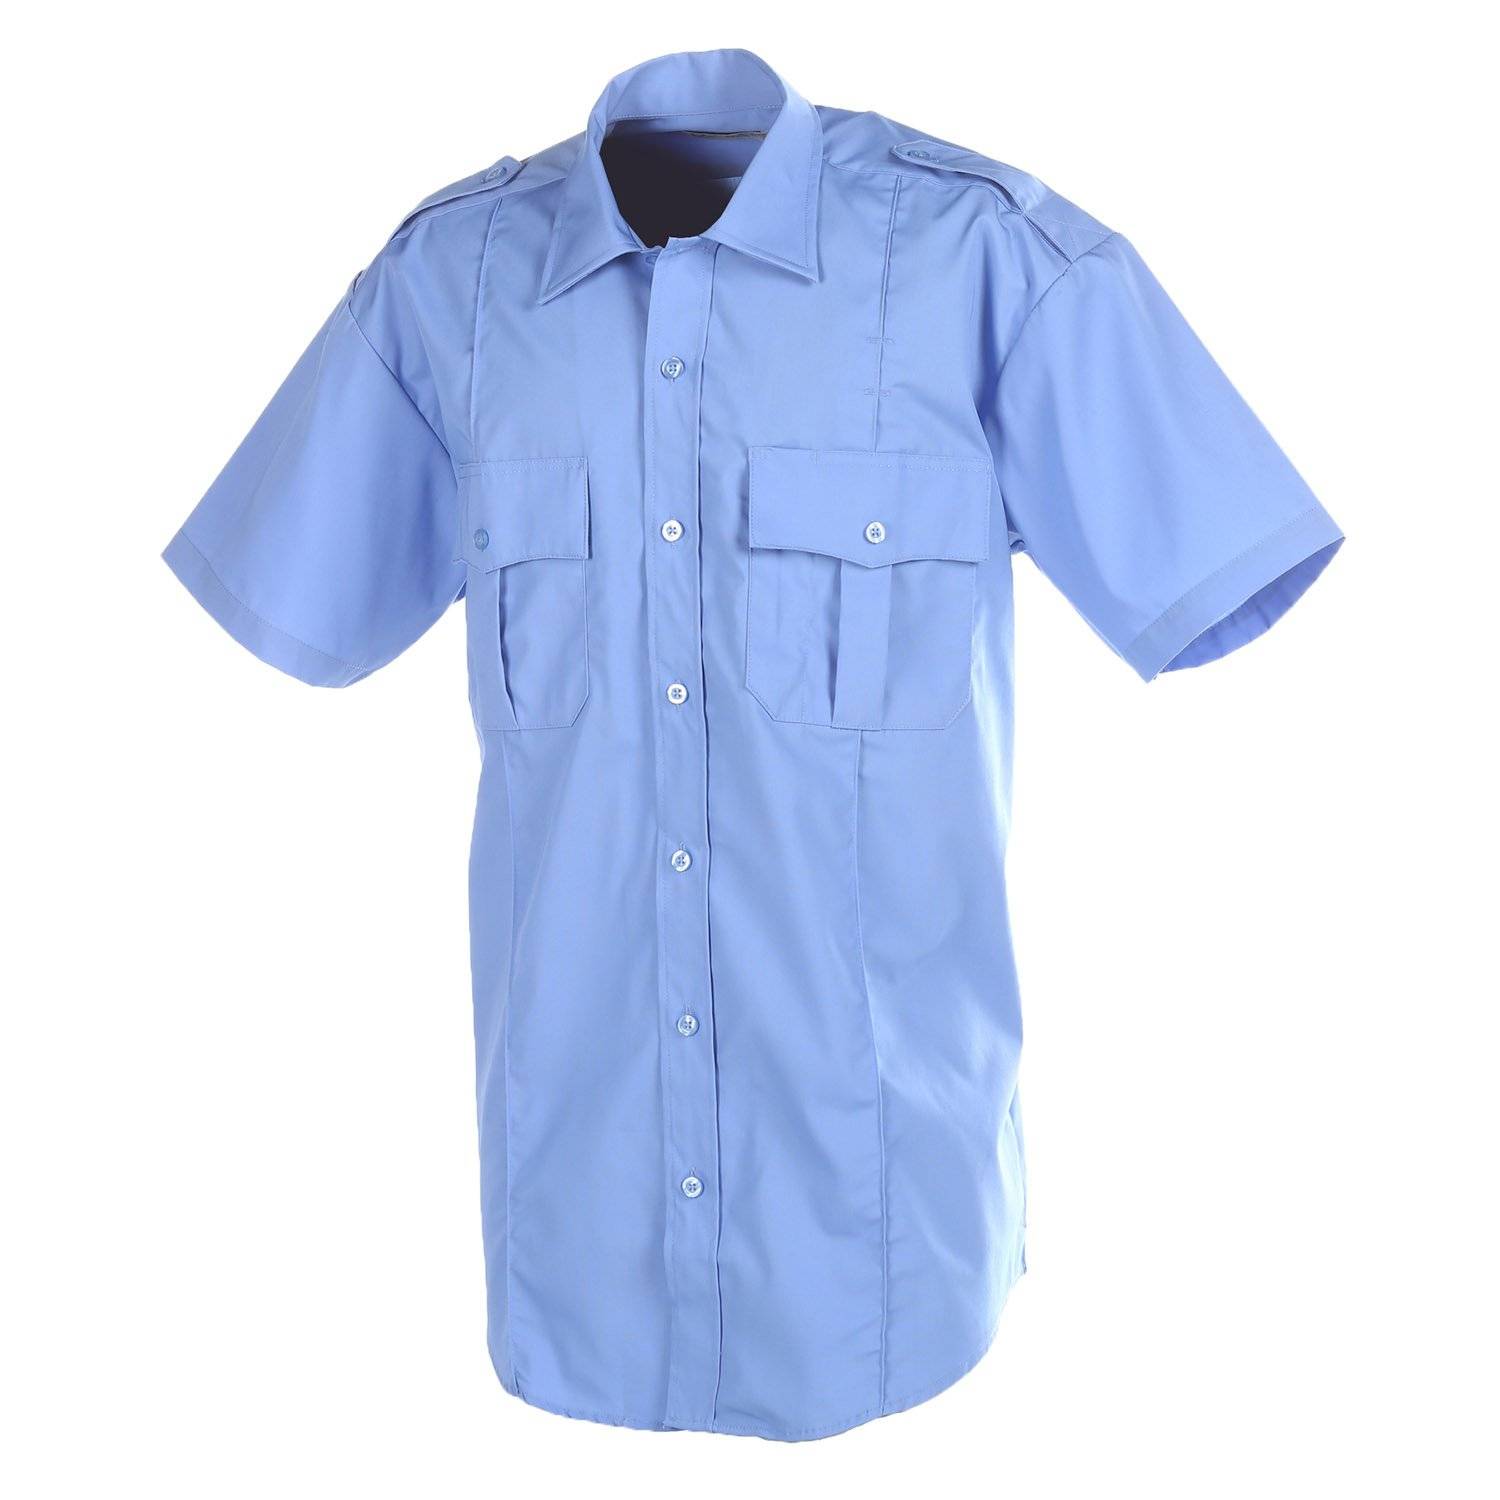 DUTYPRO SHORT SLEEVE POLY COTTON MILITARY STYLE SHIRT